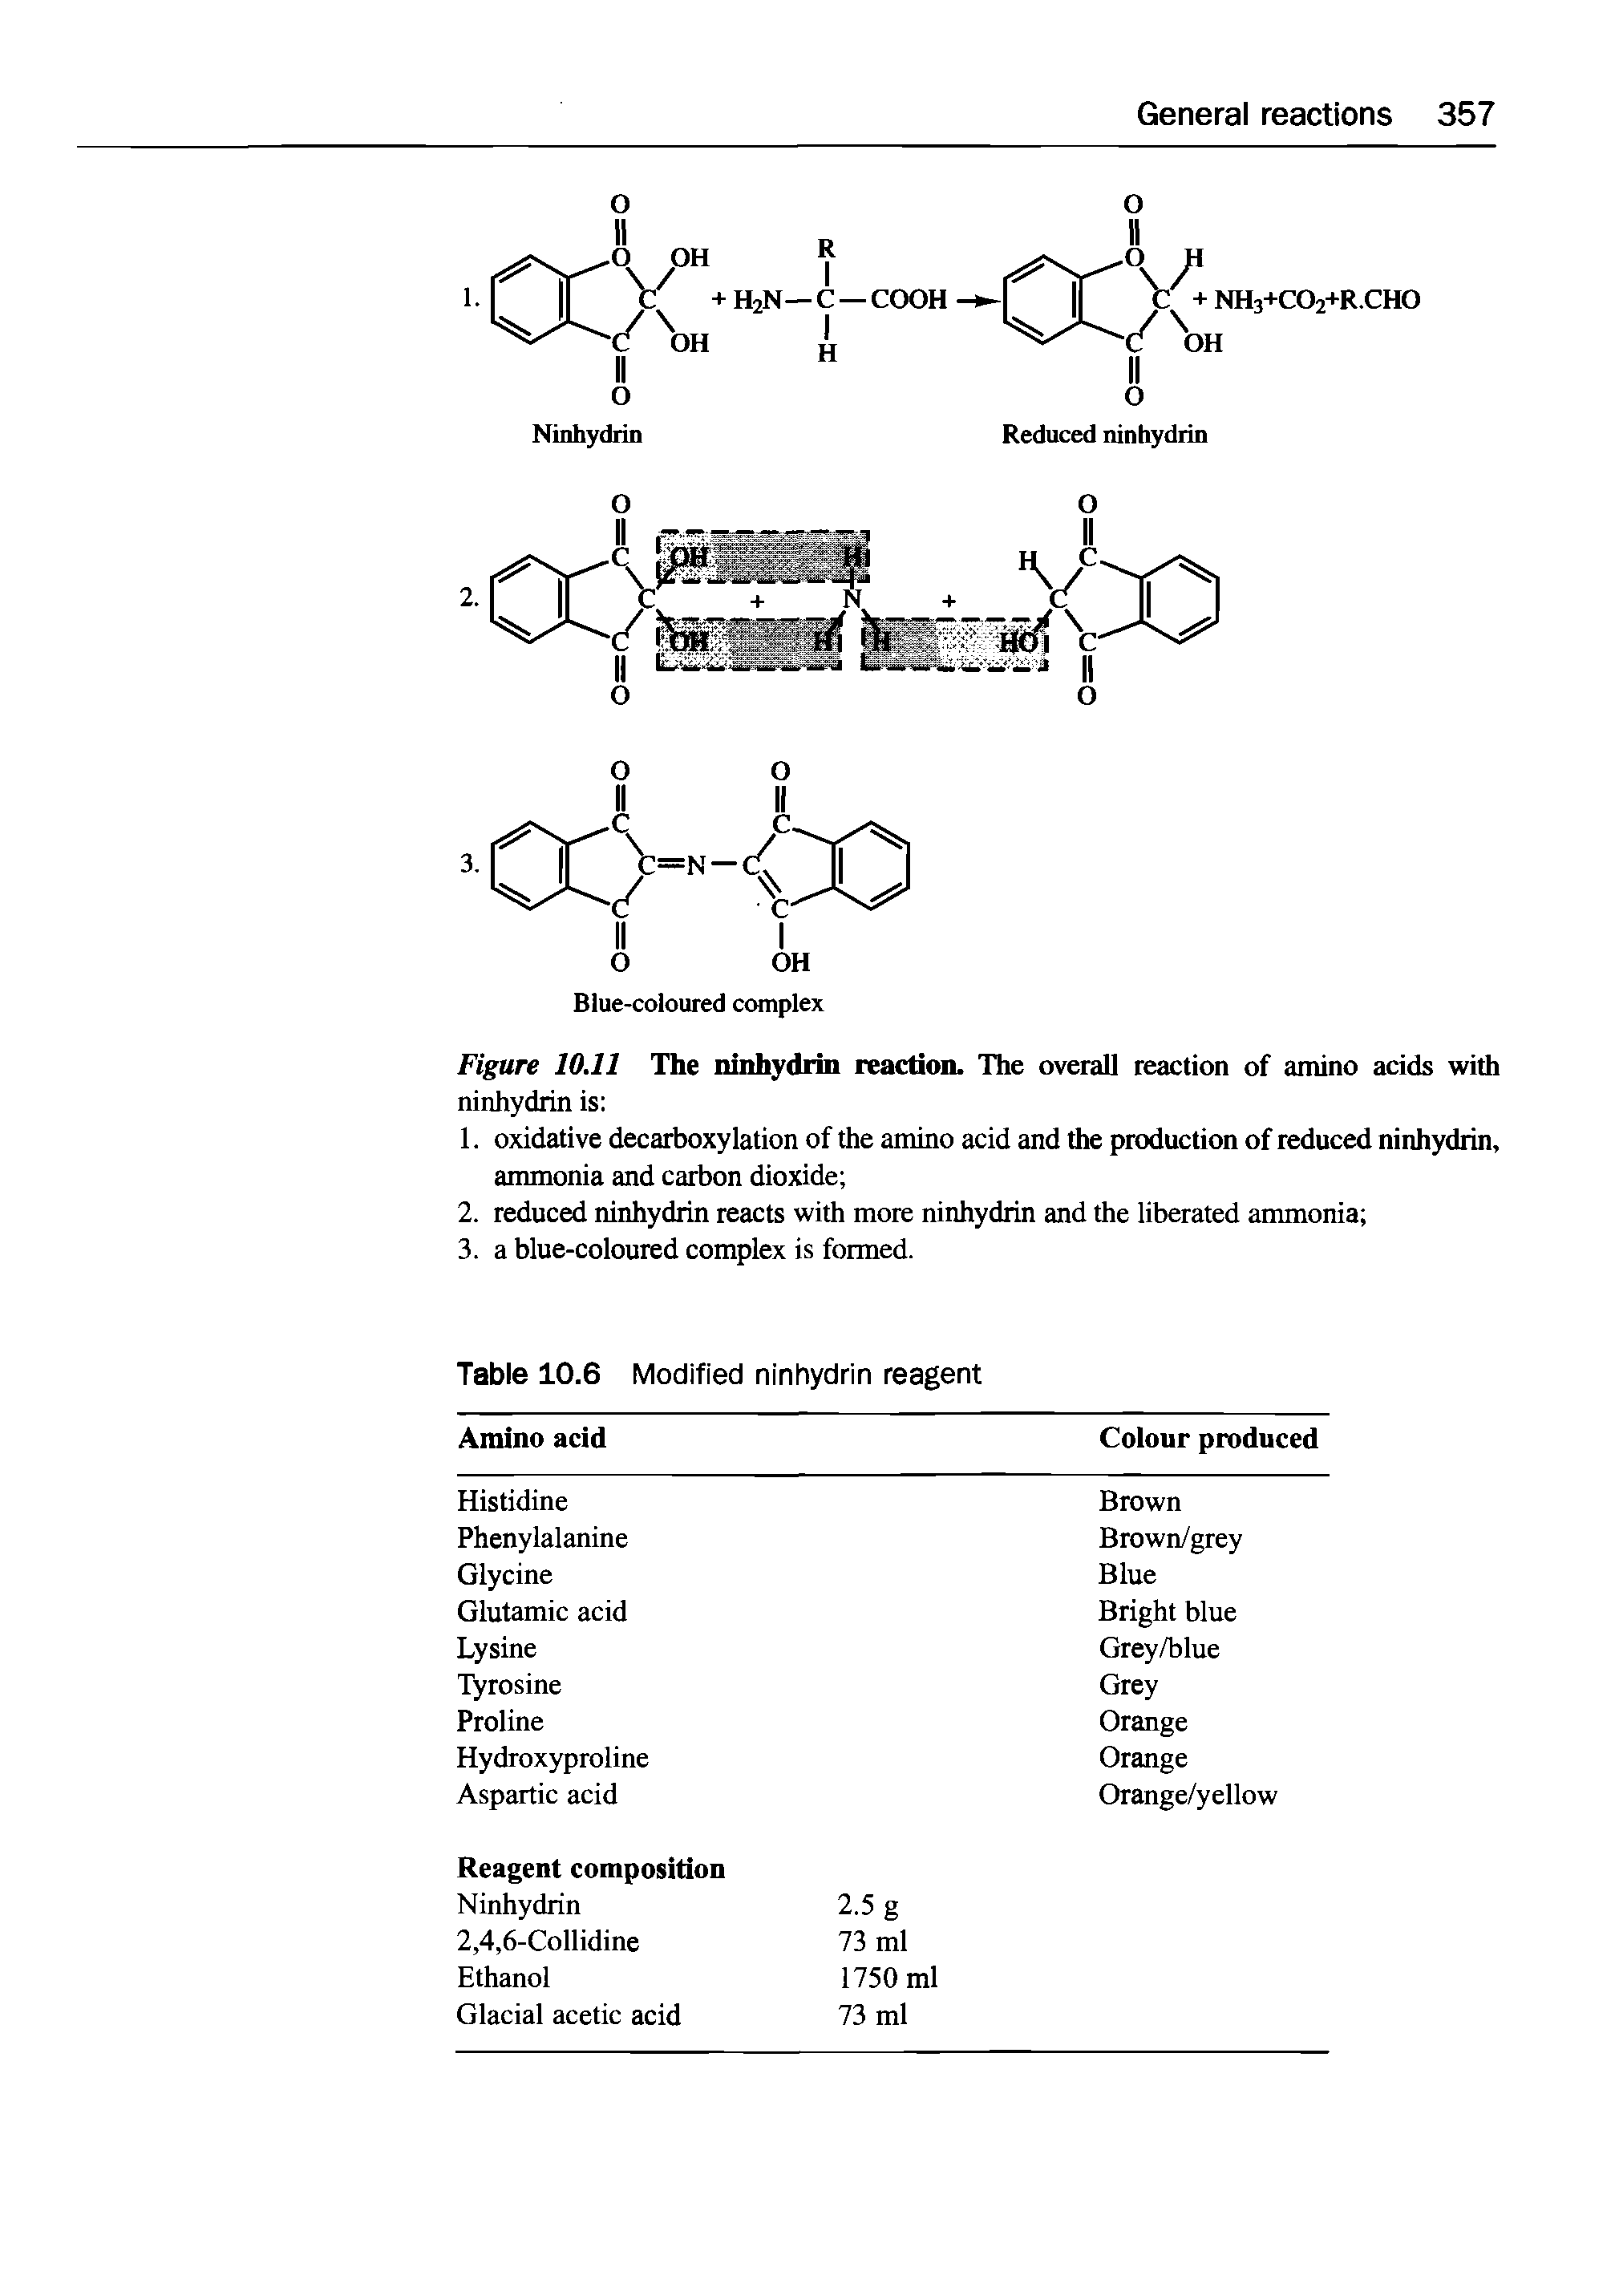 Figure 10.11 The ninhydrin reaction. The overall reaction of amino acids with ninhydrin is ...